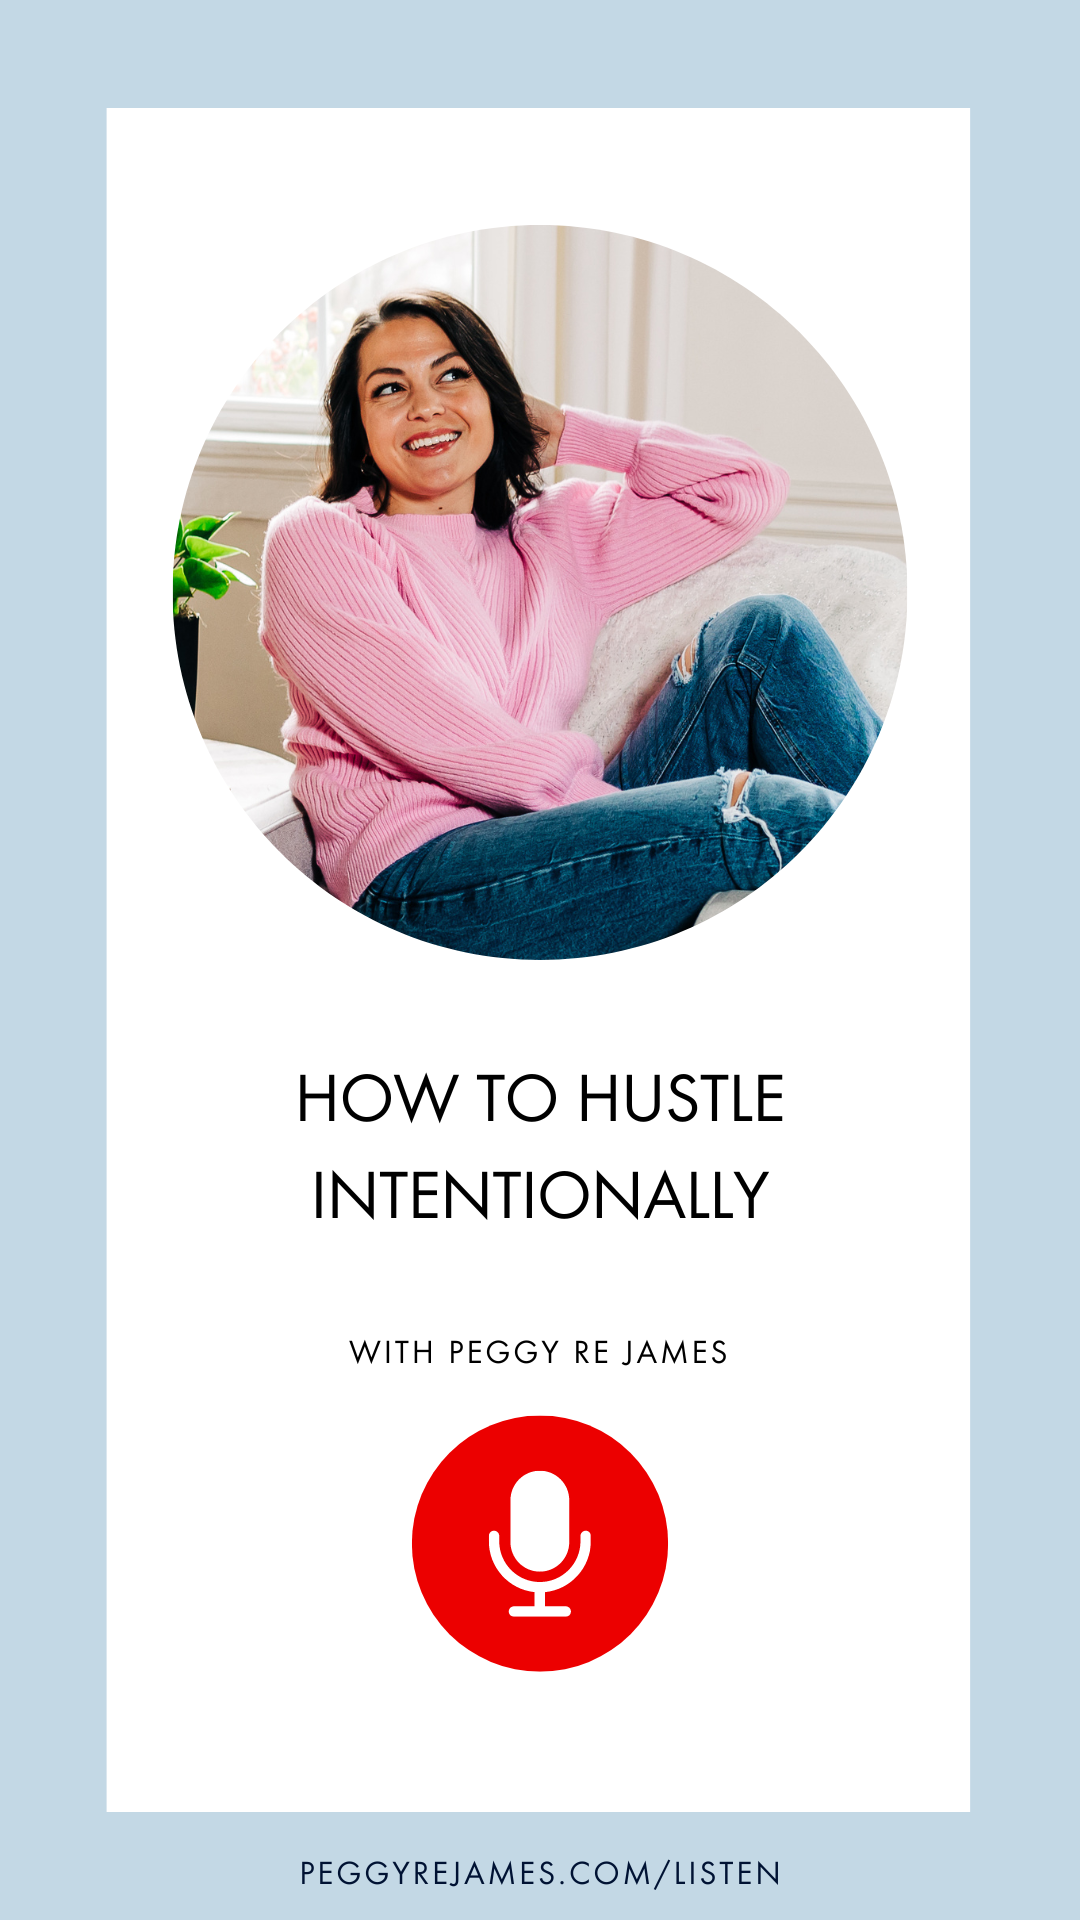 How to hustle INTENTIONALLY